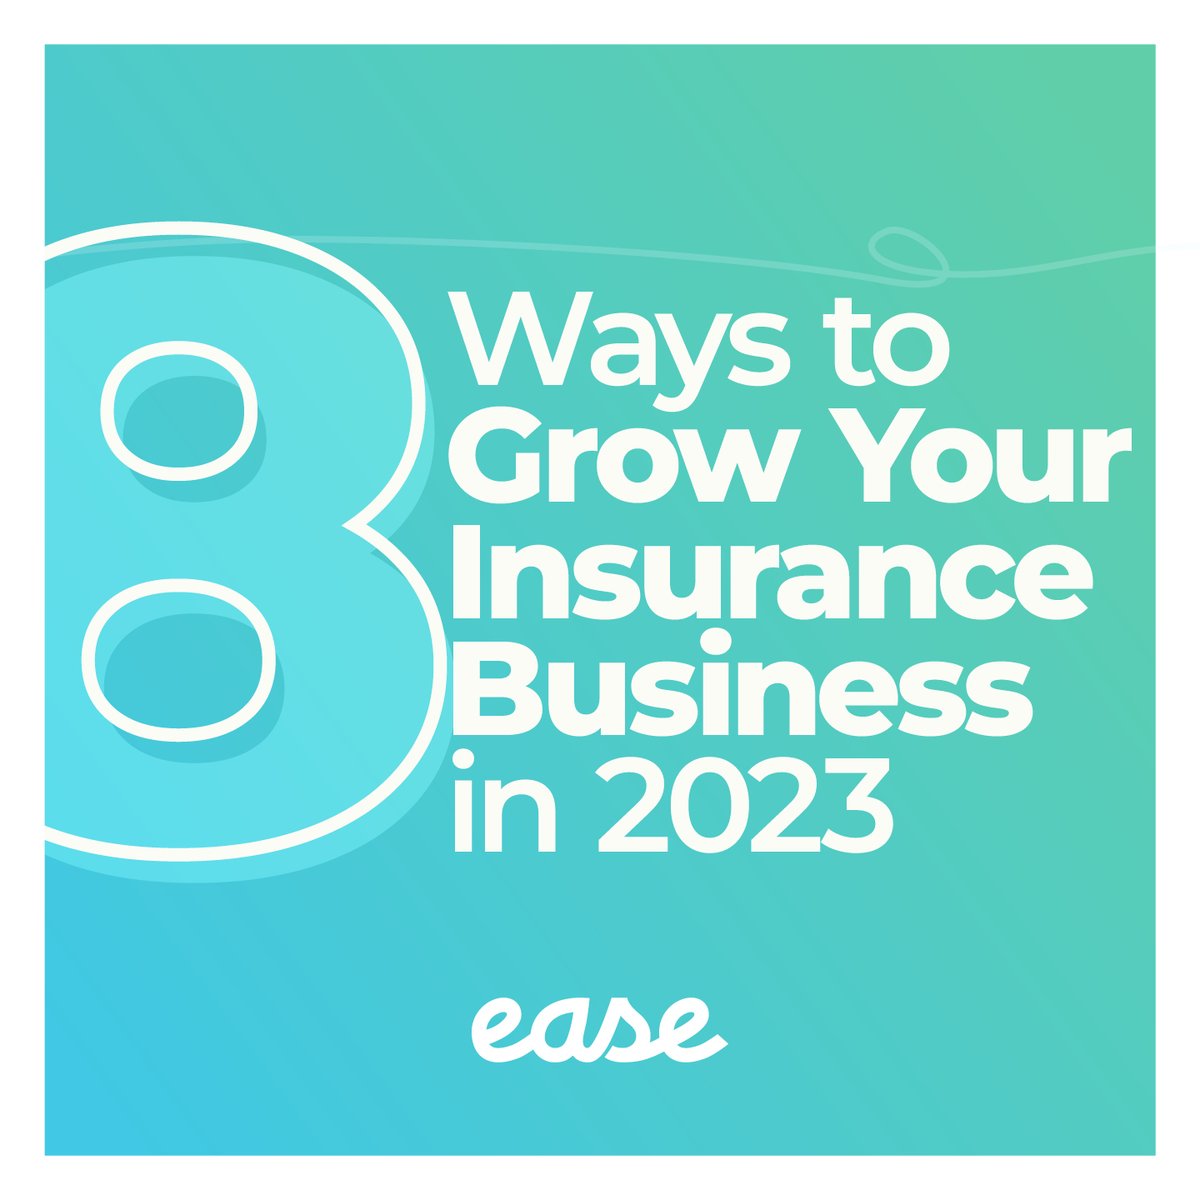 The perfect time to start growing your insurance business is right now. ⏰ Register now for tomorrow’s webinar at 11 am PT / 2 pm ET to discover the 8 ways to make it happen. See you there. 😉 ow.ly/HloY50NF4nC